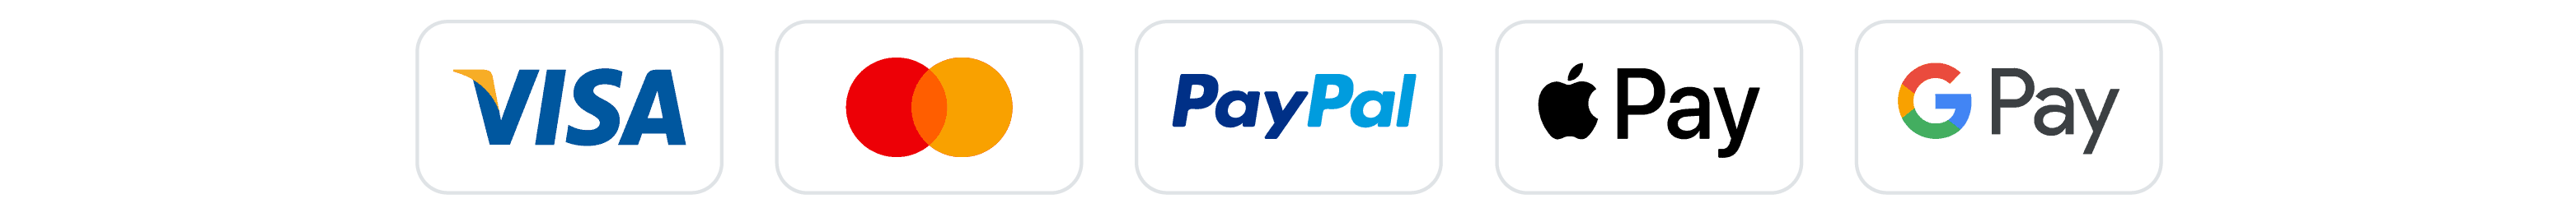 sd-paymenticons-new